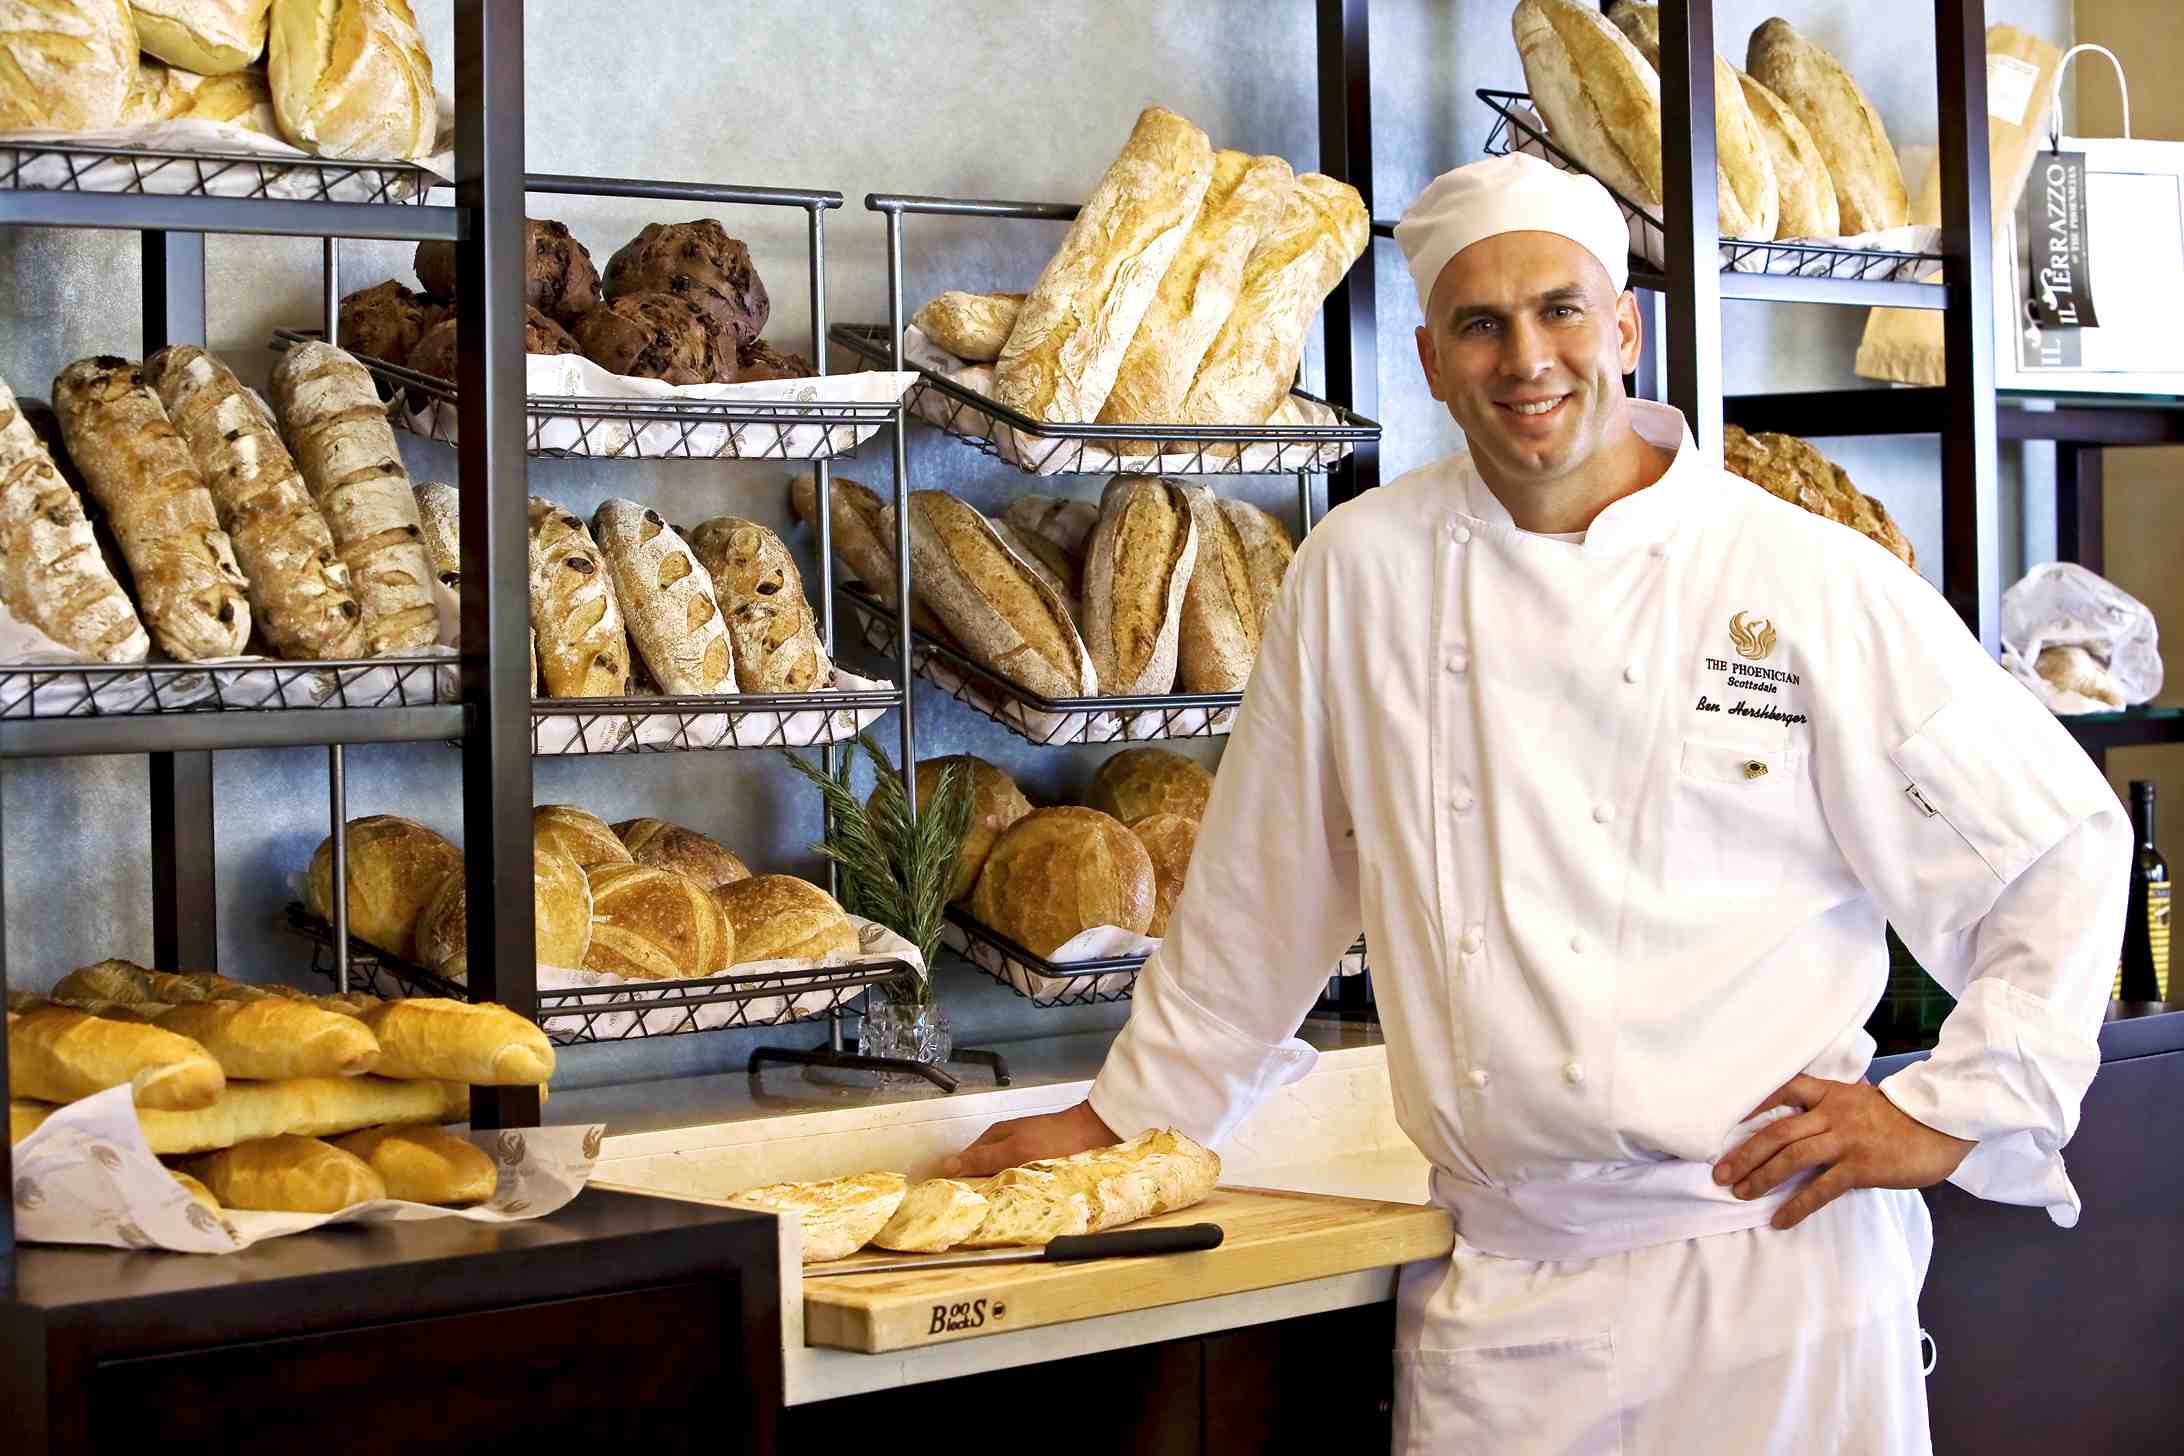 Bakery Production Assistant - Apply for this Job in Redding CA